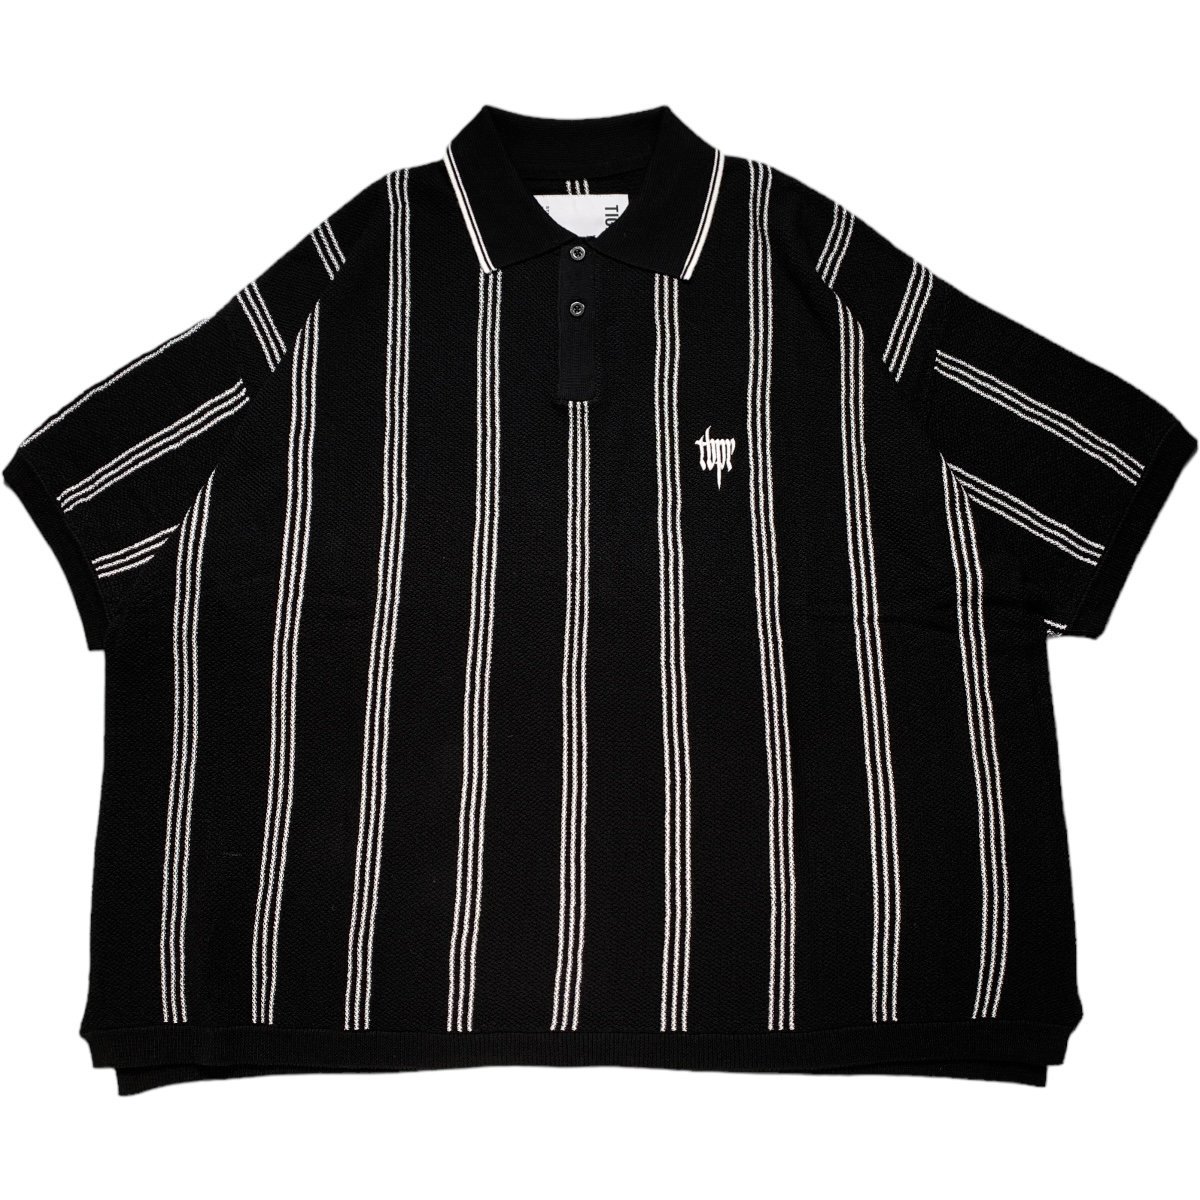 TIGHTBOOTH《タイトブース》TBPR / STRIPE KNIT POLO(SS24-KN03 